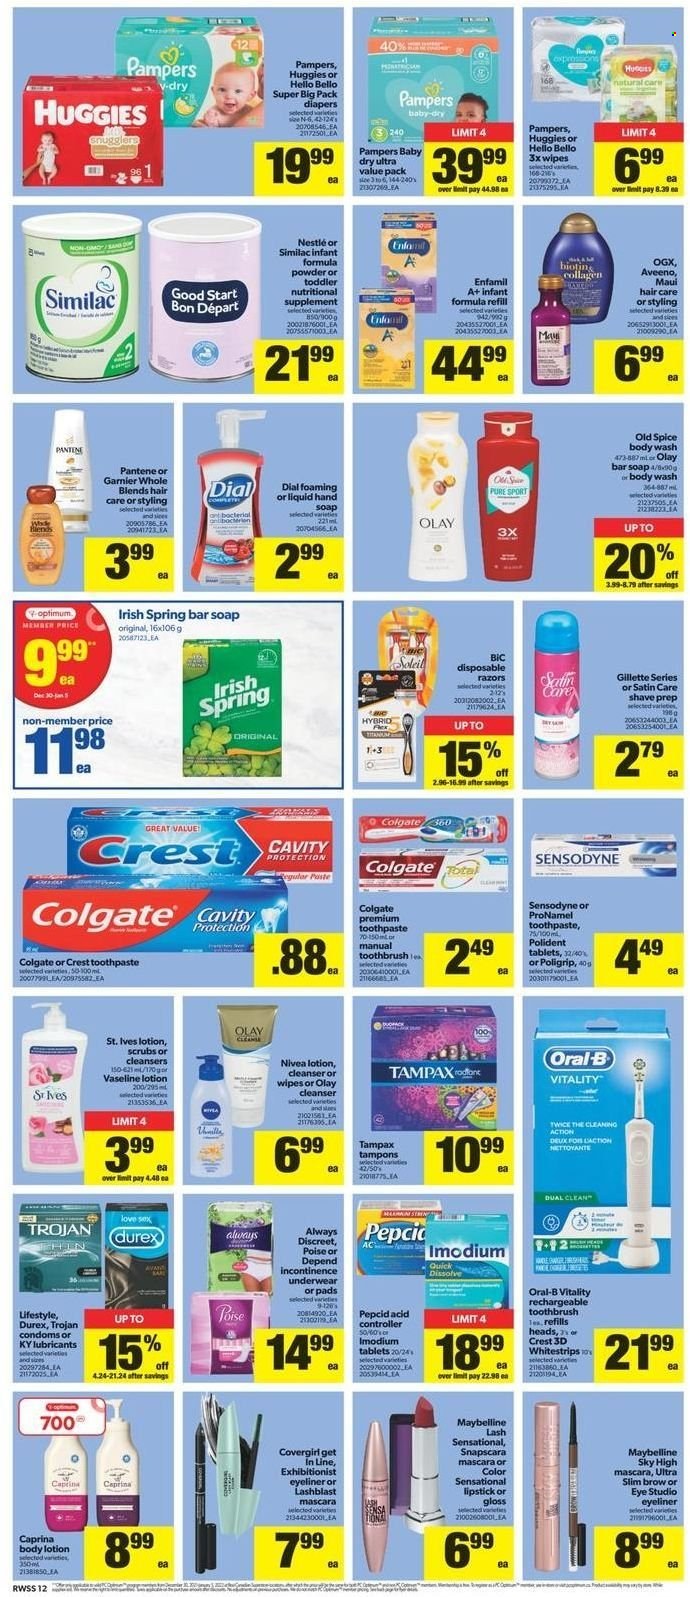 thumbnail - Real Canadian Superstore Flyer - December 30, 2021 - January 05, 2022 - Sales products - spice, Enfamil, Similac, wipes, nappies, Aveeno, body wash, hand soap, Vaseline, soap bar, Dial, soap, toothbrush, toothpaste, Polident, Crest, Always Discreet, incontinence underwear, tampons, cleanser, Olay, OGX, body lotion, BIC, mascara, eyeliner, Optimum, nutritional supplement, Nestlé, Colgate, Garnier, Gillette, Maybelline, Tampax, Huggies, Imodium, Pampers, Pantene, Nivea, Old Spice, Oral-B, Sensodyne. Page 12.